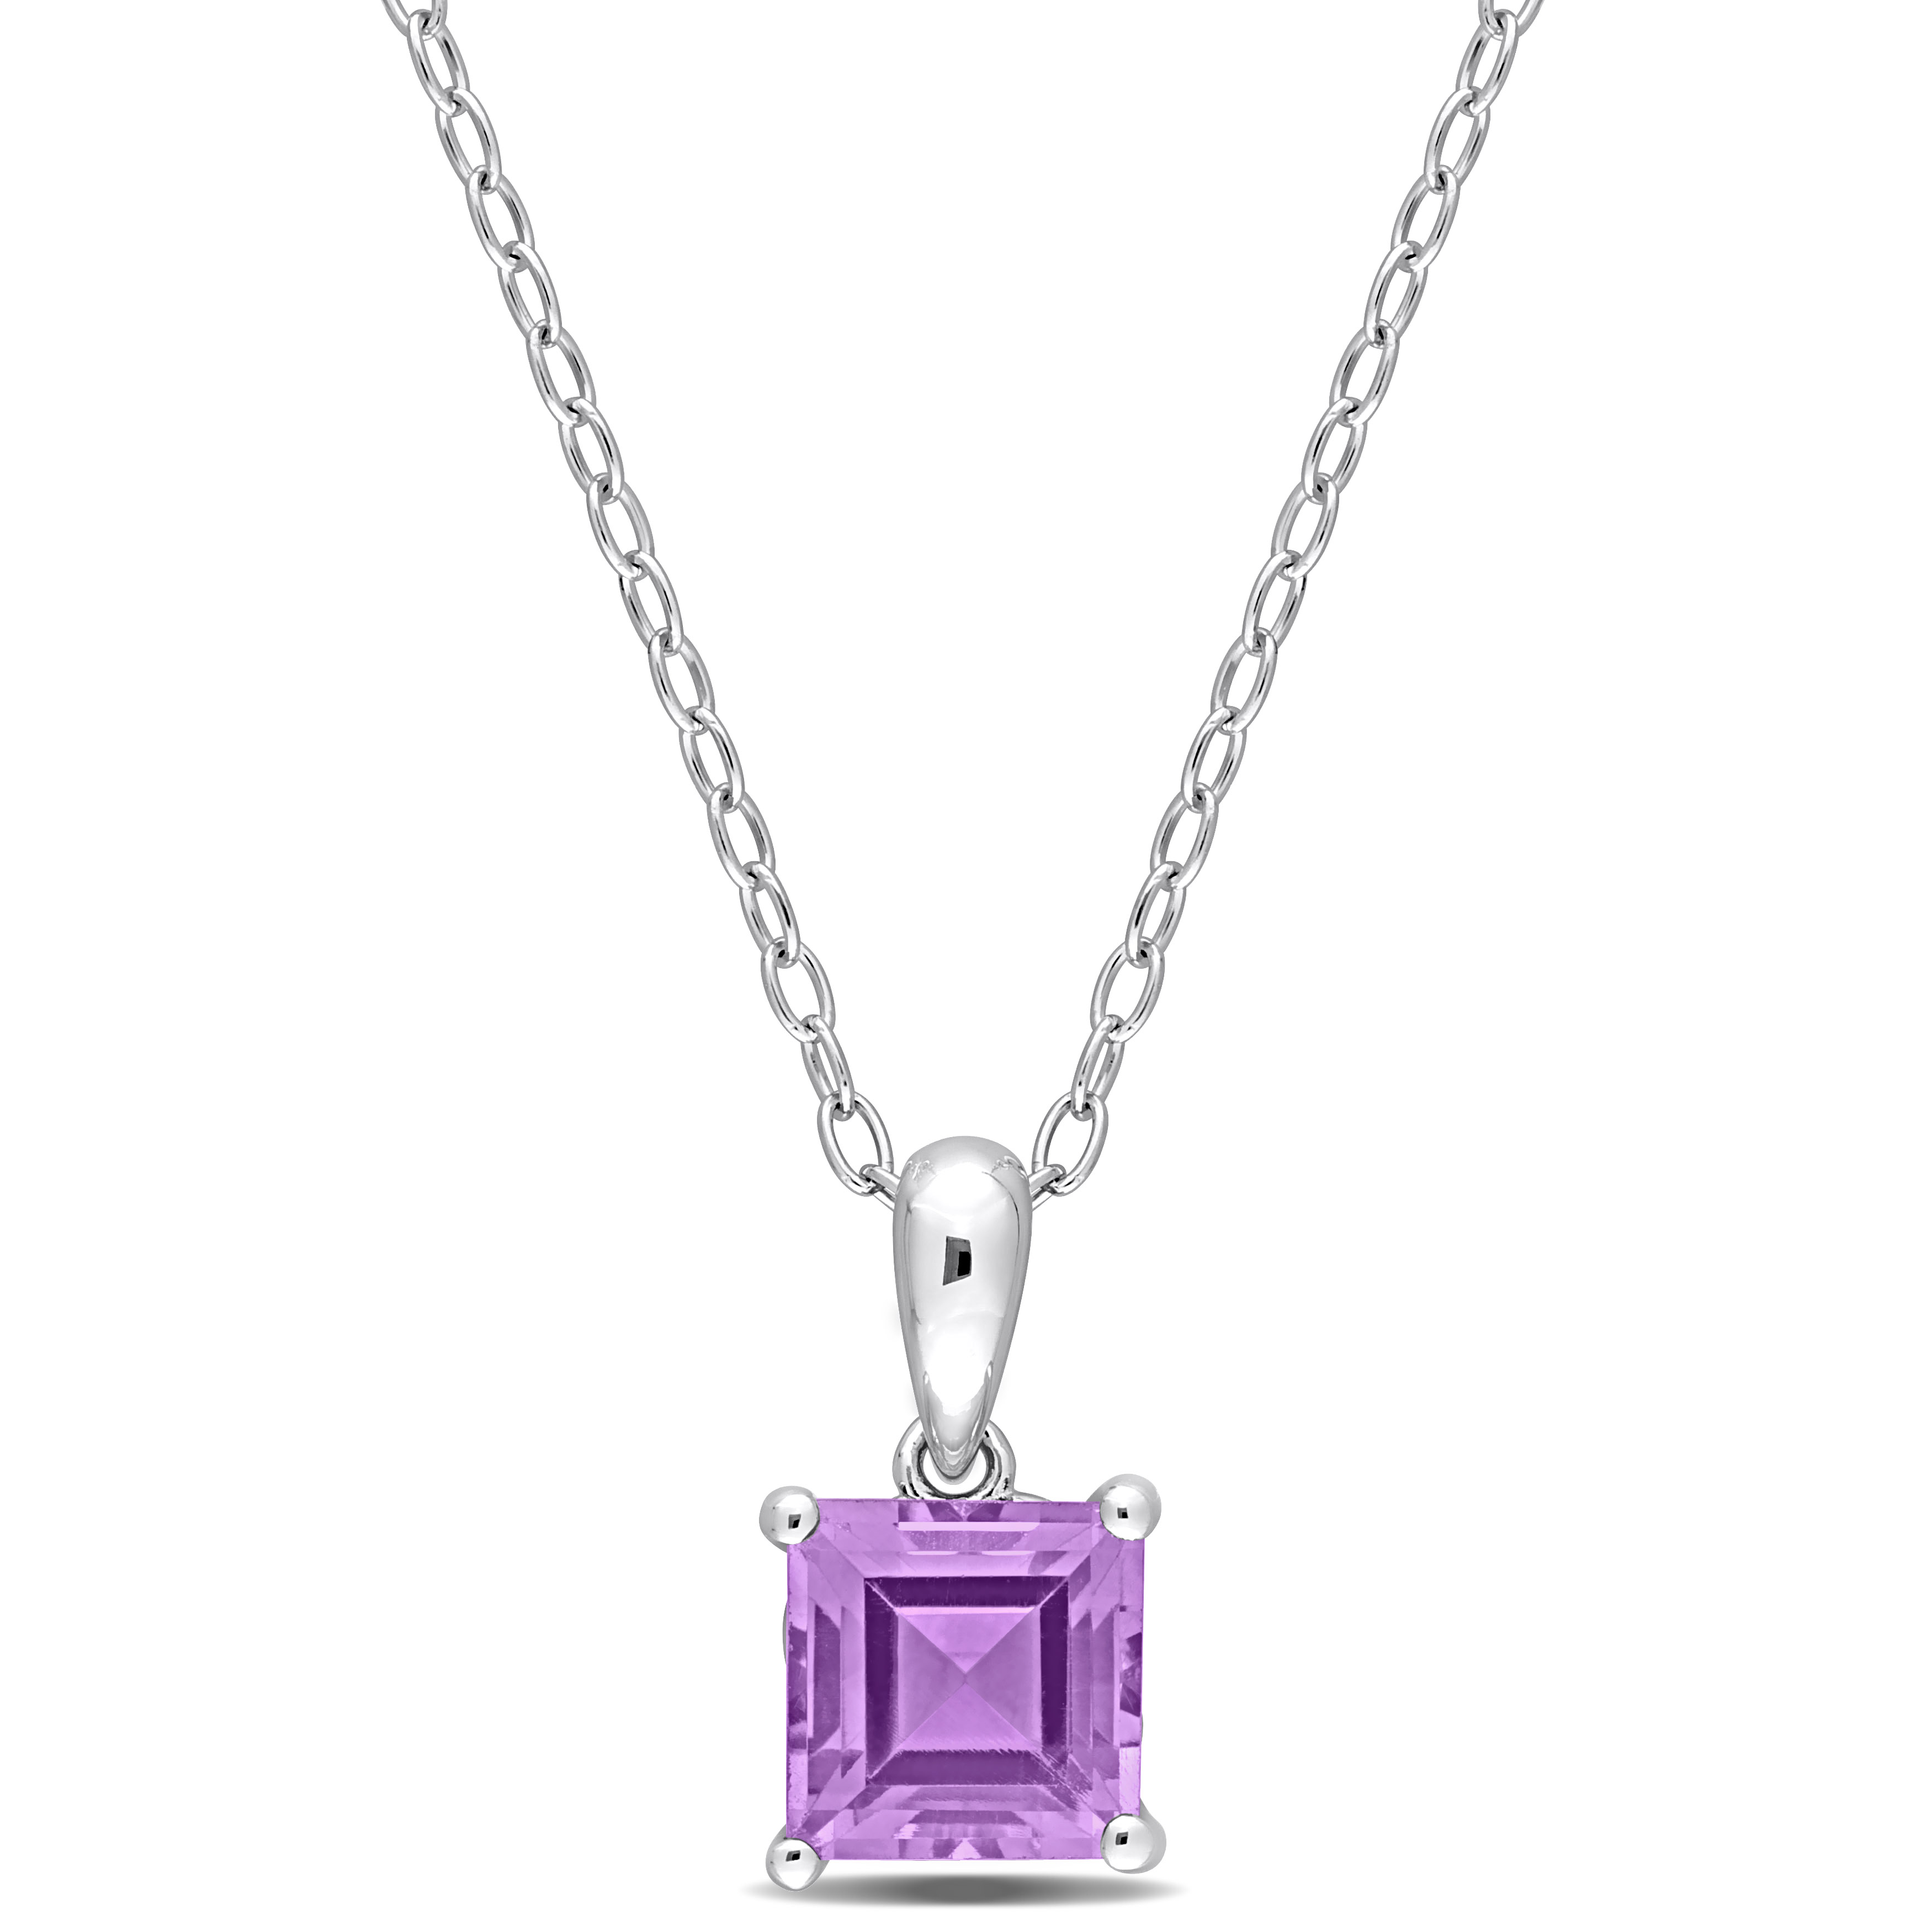 1 CT TGW Princess Cut Amethyst Solitaire Heart Design Pendant with Chain in Sterling Silver - 18 in.